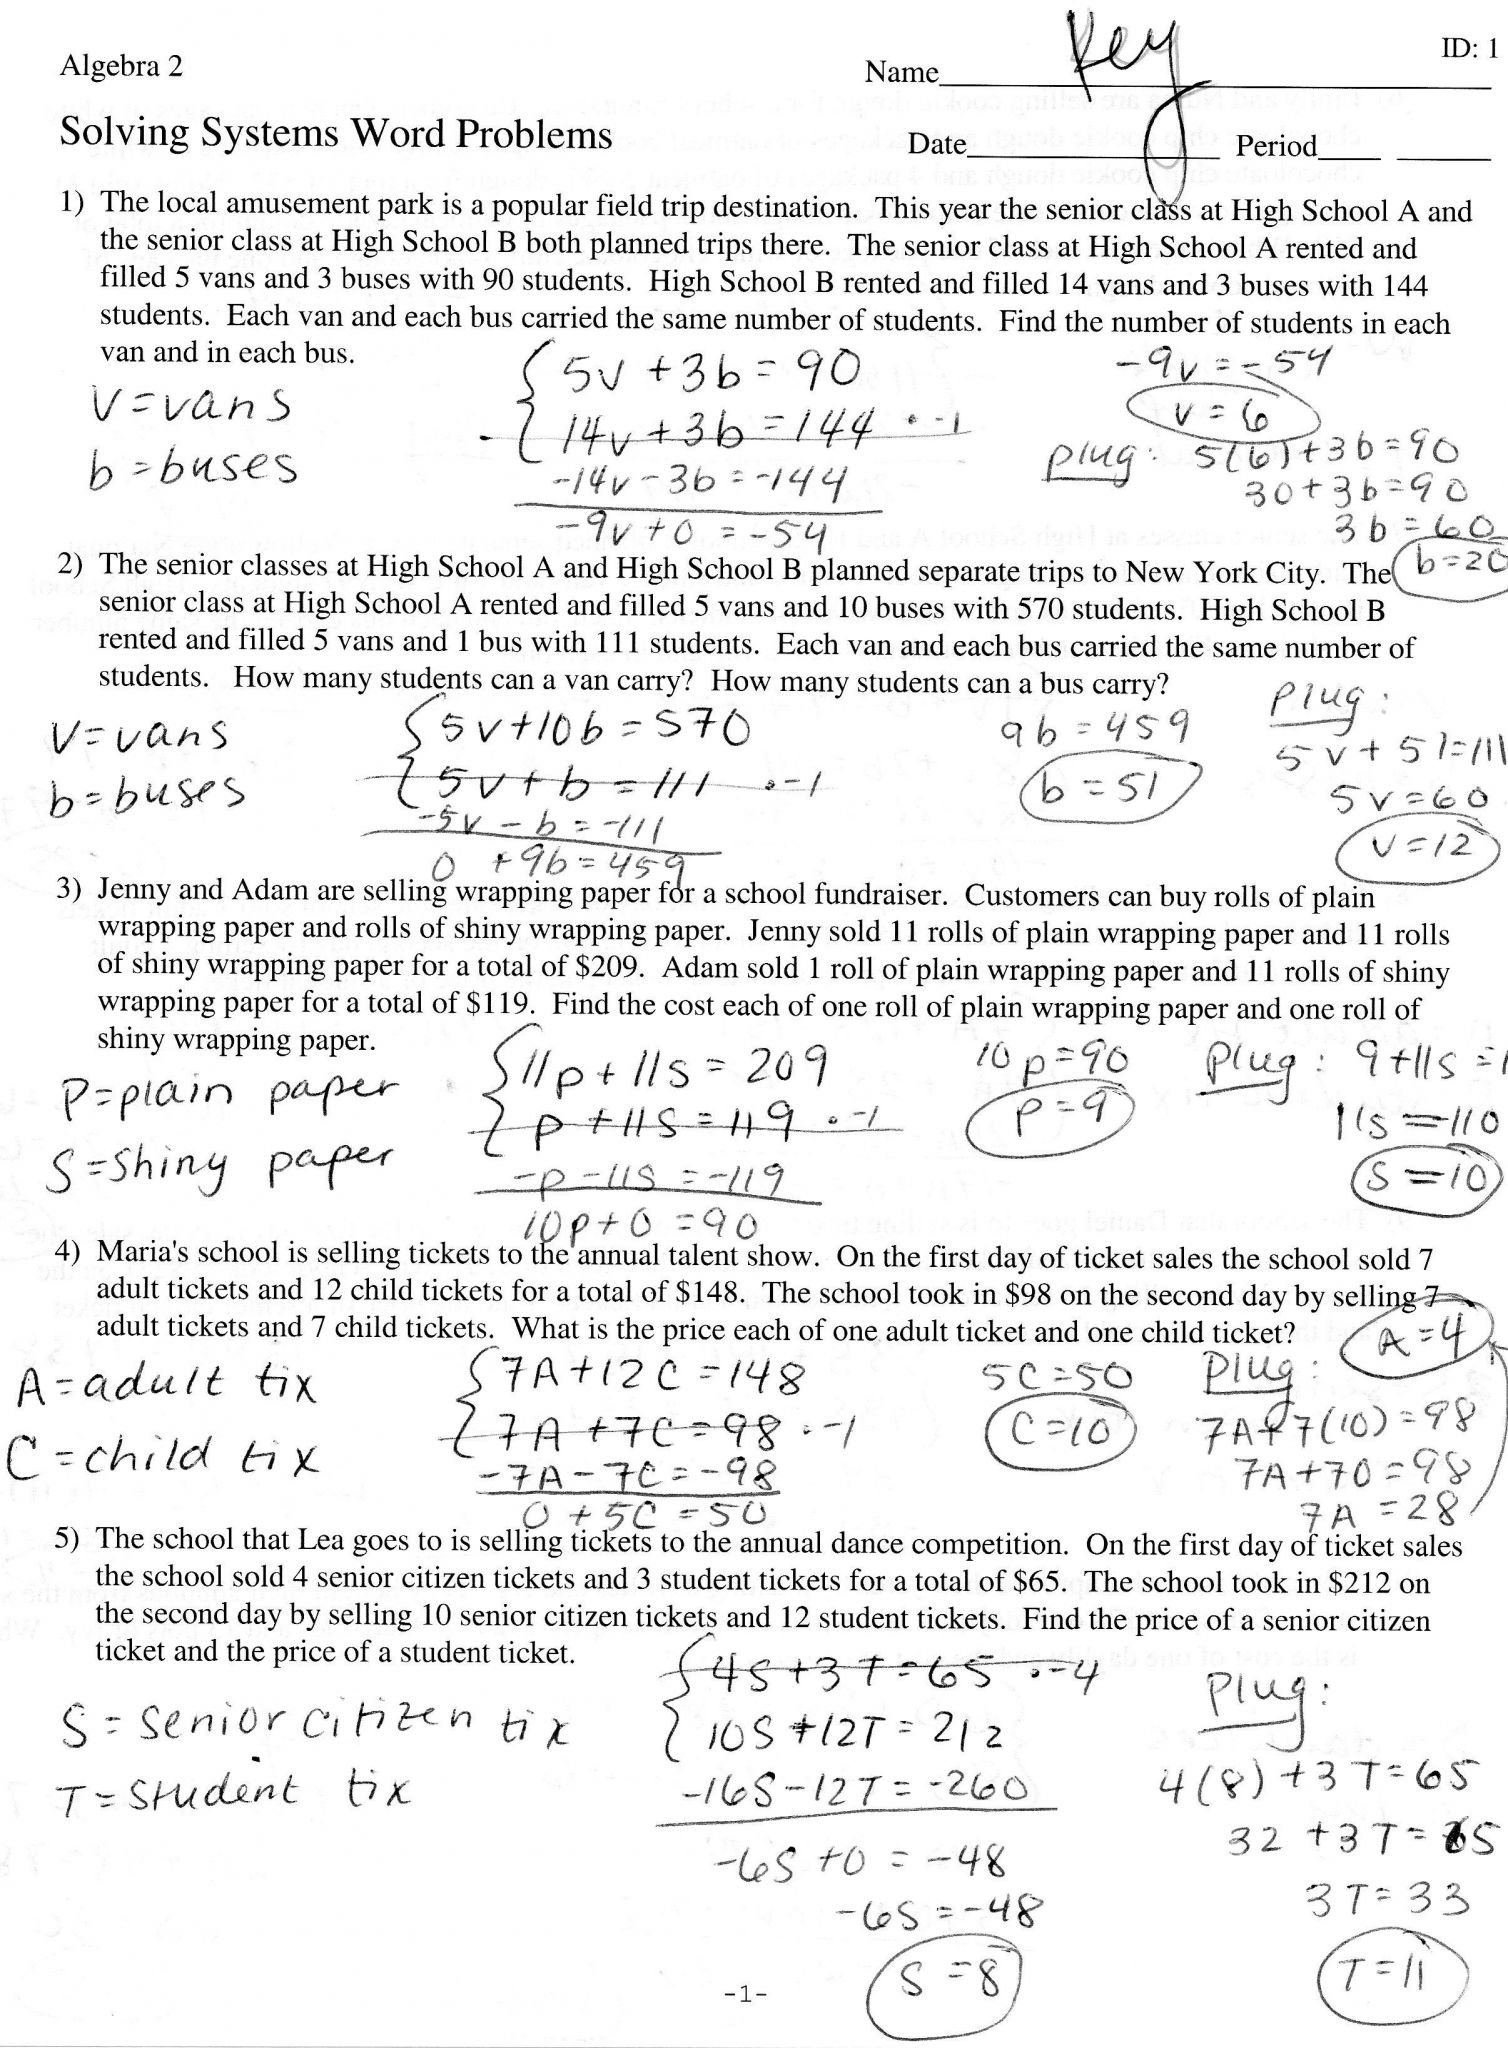 Systems Of Linear Equations Word Problems Worksheet Answers Or Systems Of Linear Equations Word Problems Worksheet Answers